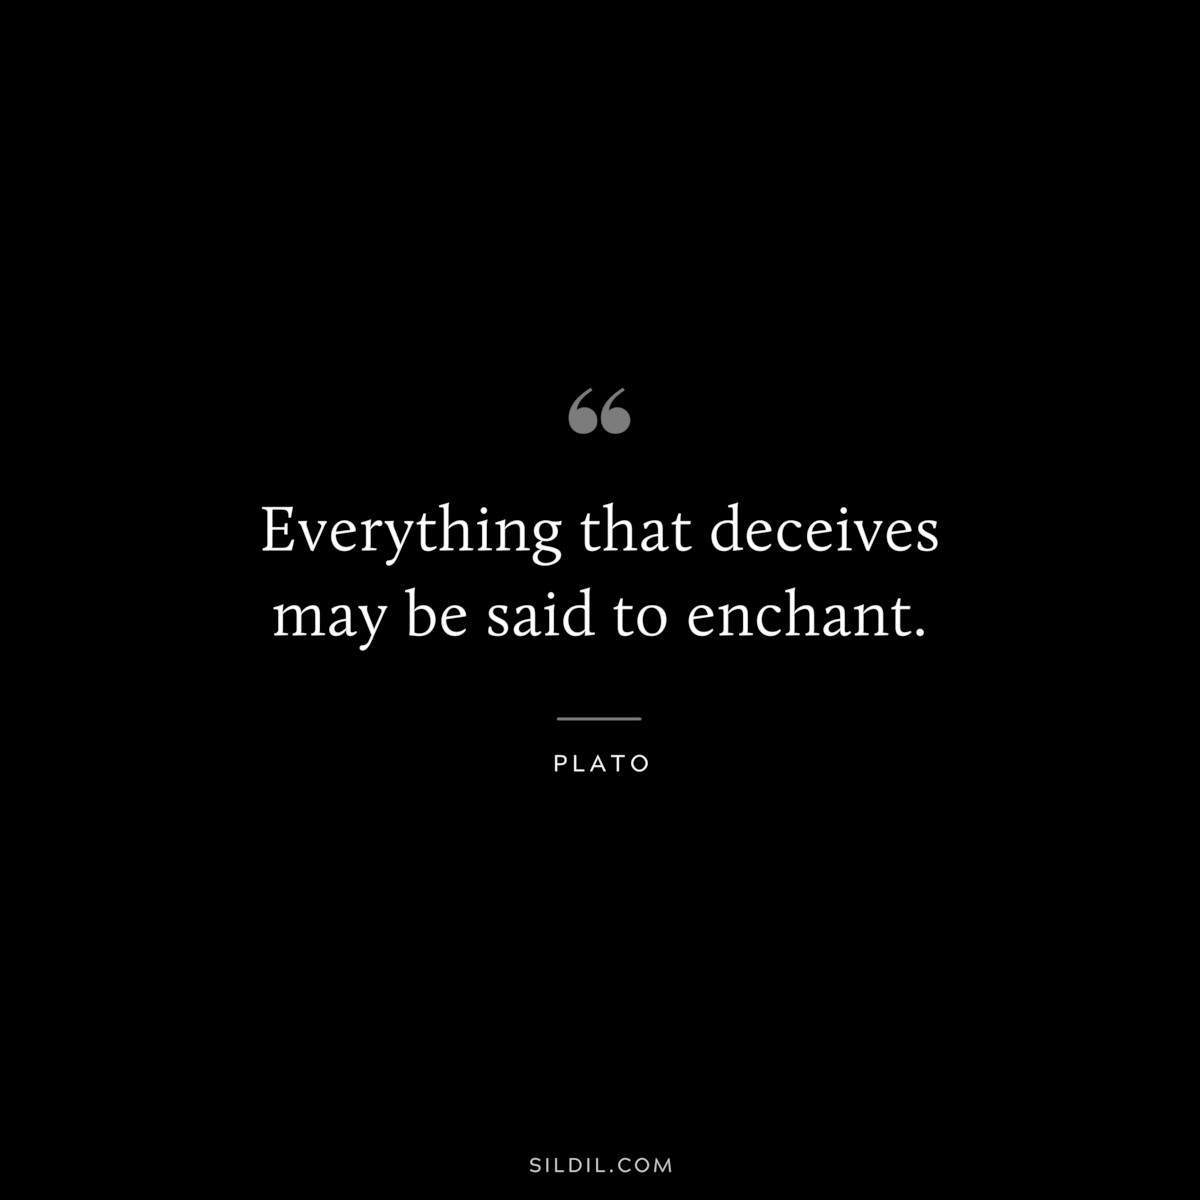 Everything that deceives may be said to enchant. ― Plato